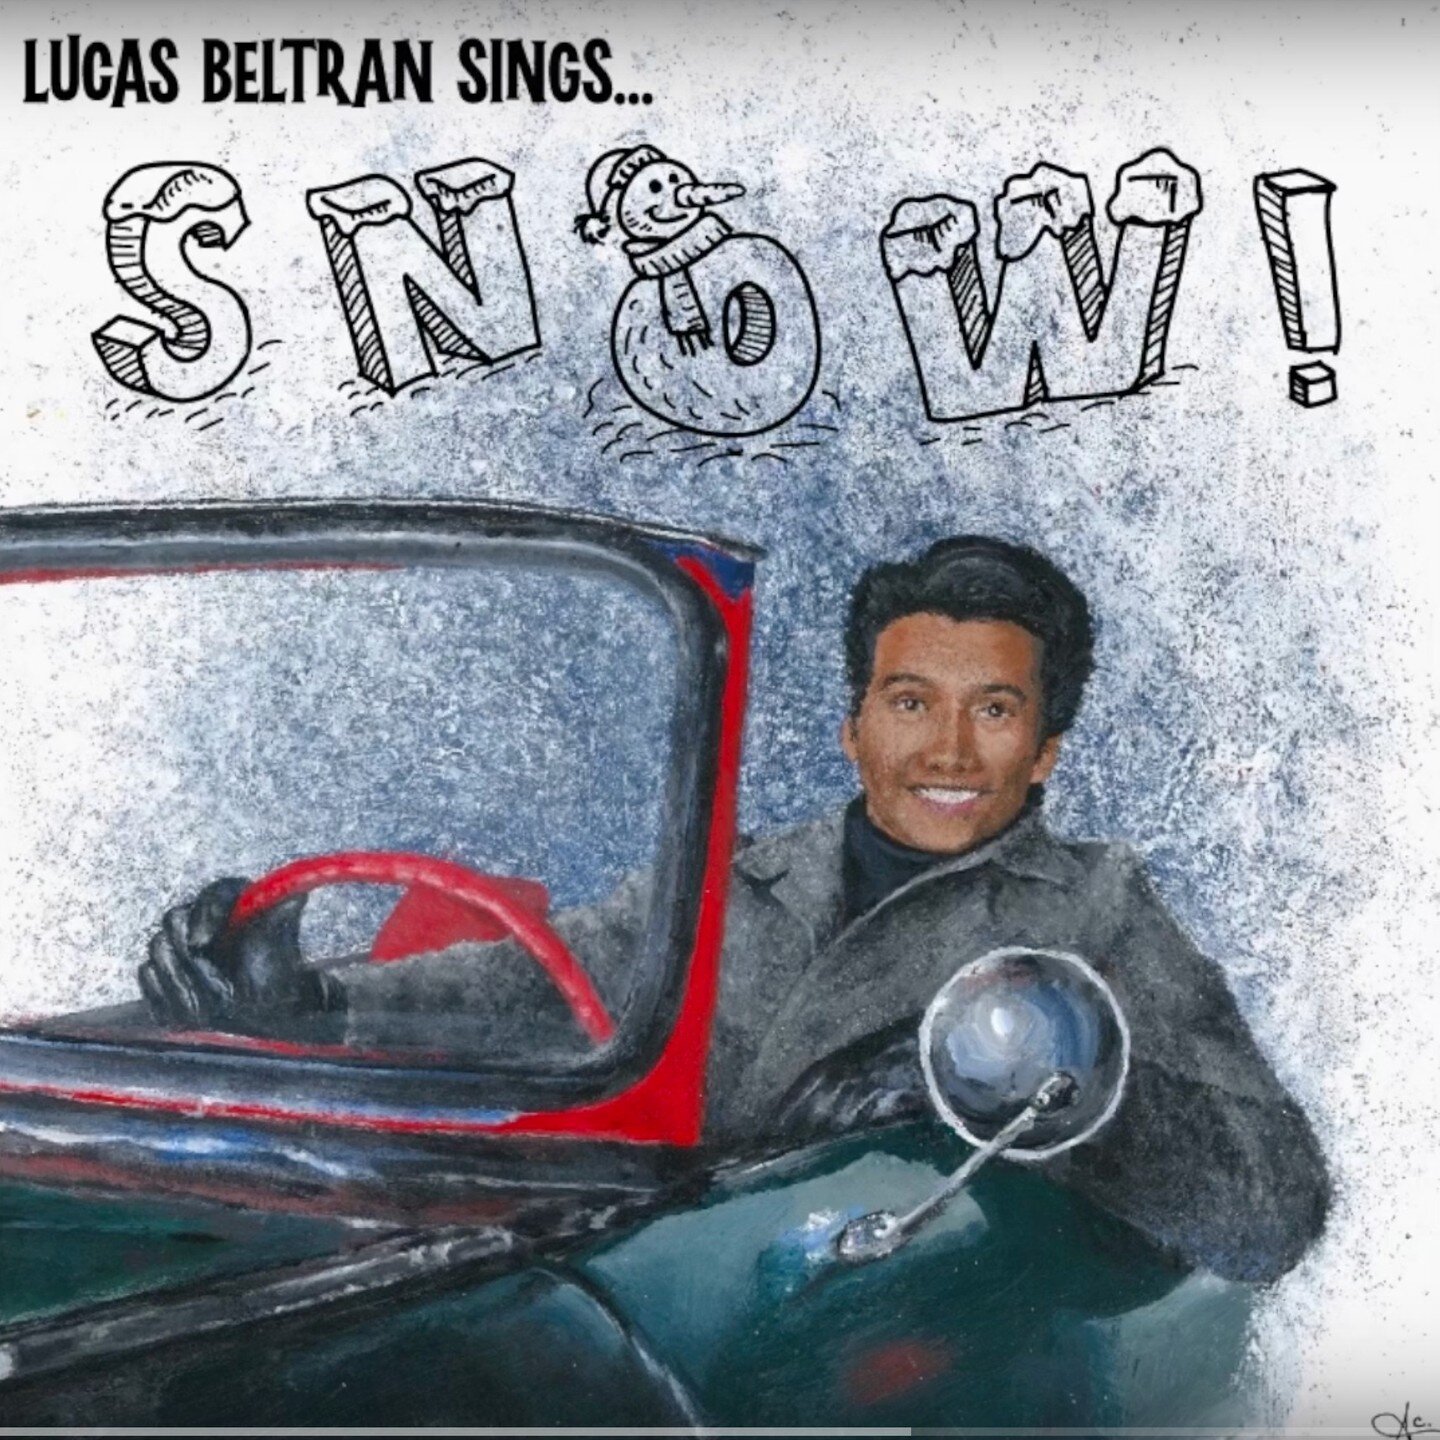 Amazing young crooner Lucas Beltran just released the song Snow. It was a pleasure to work with you on the mix Lucas!!

Check out the song on YouTube here:
https://youtu.be/6wa09dBZMaE?si=OFBXLBv0HkSlREfo